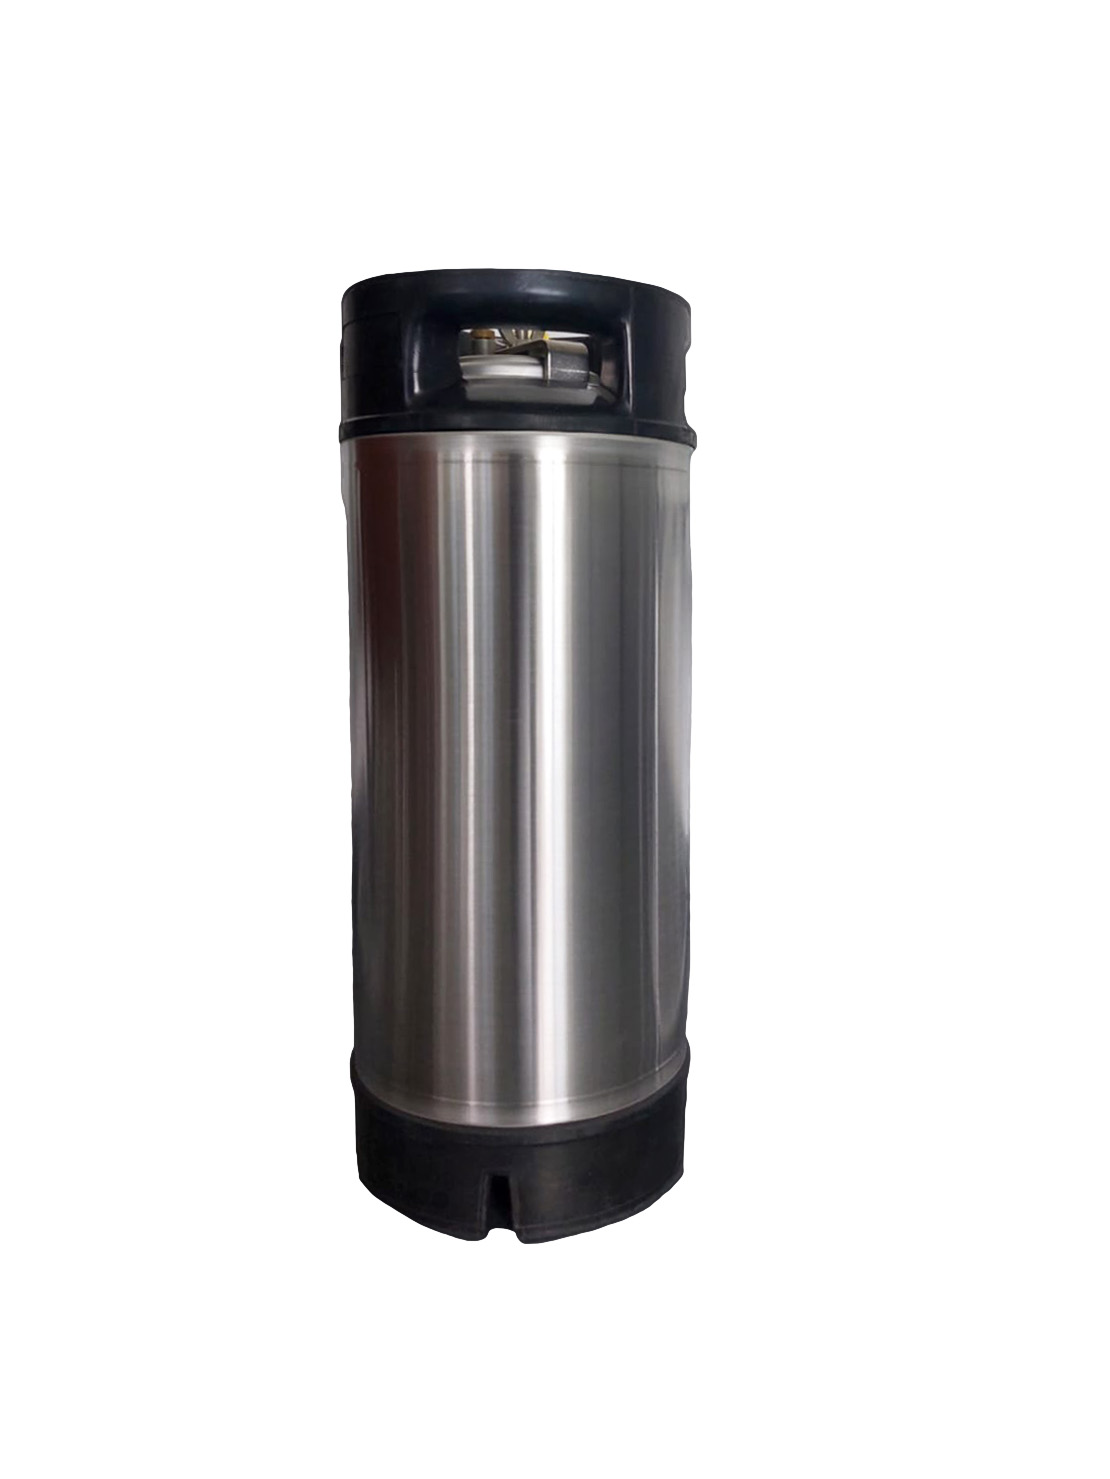 19 Liter Stainless Steel Mixed Bed Demineralization Cartridge Filled with Premium Resin